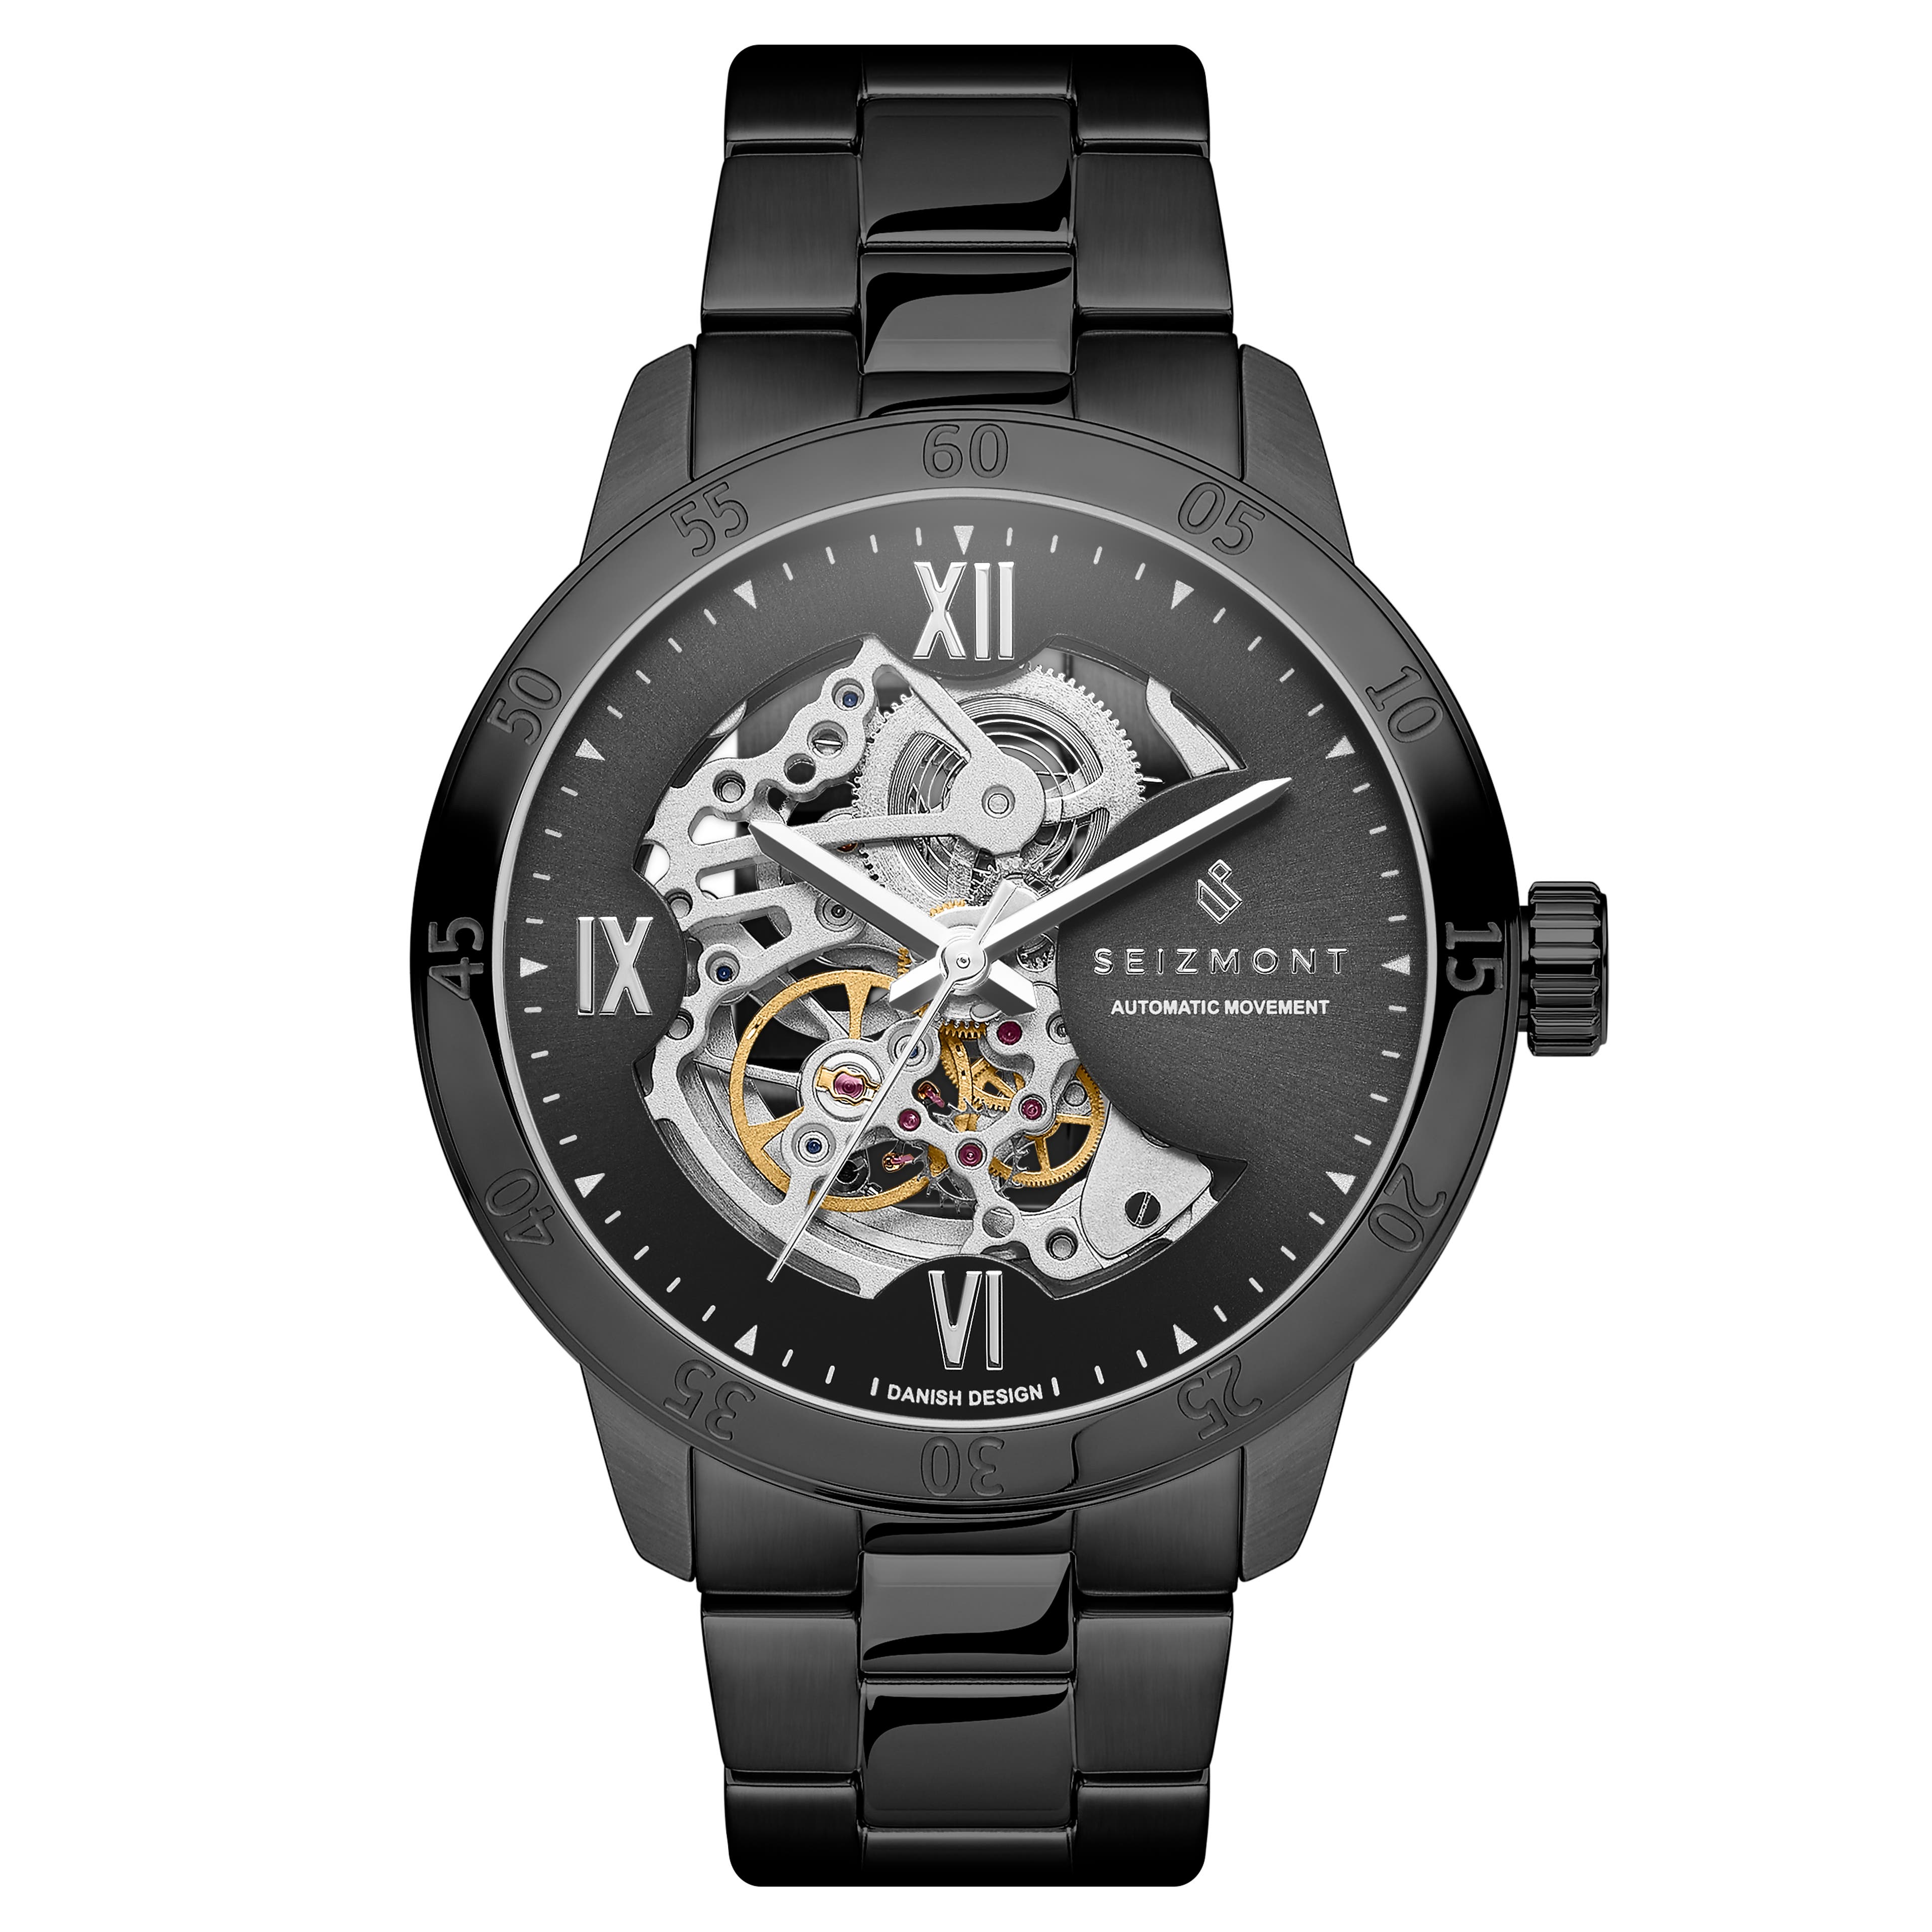 Dante II | Black Stainless Steel Skeleton Watch With Black Dial & Silver-Tone Movement